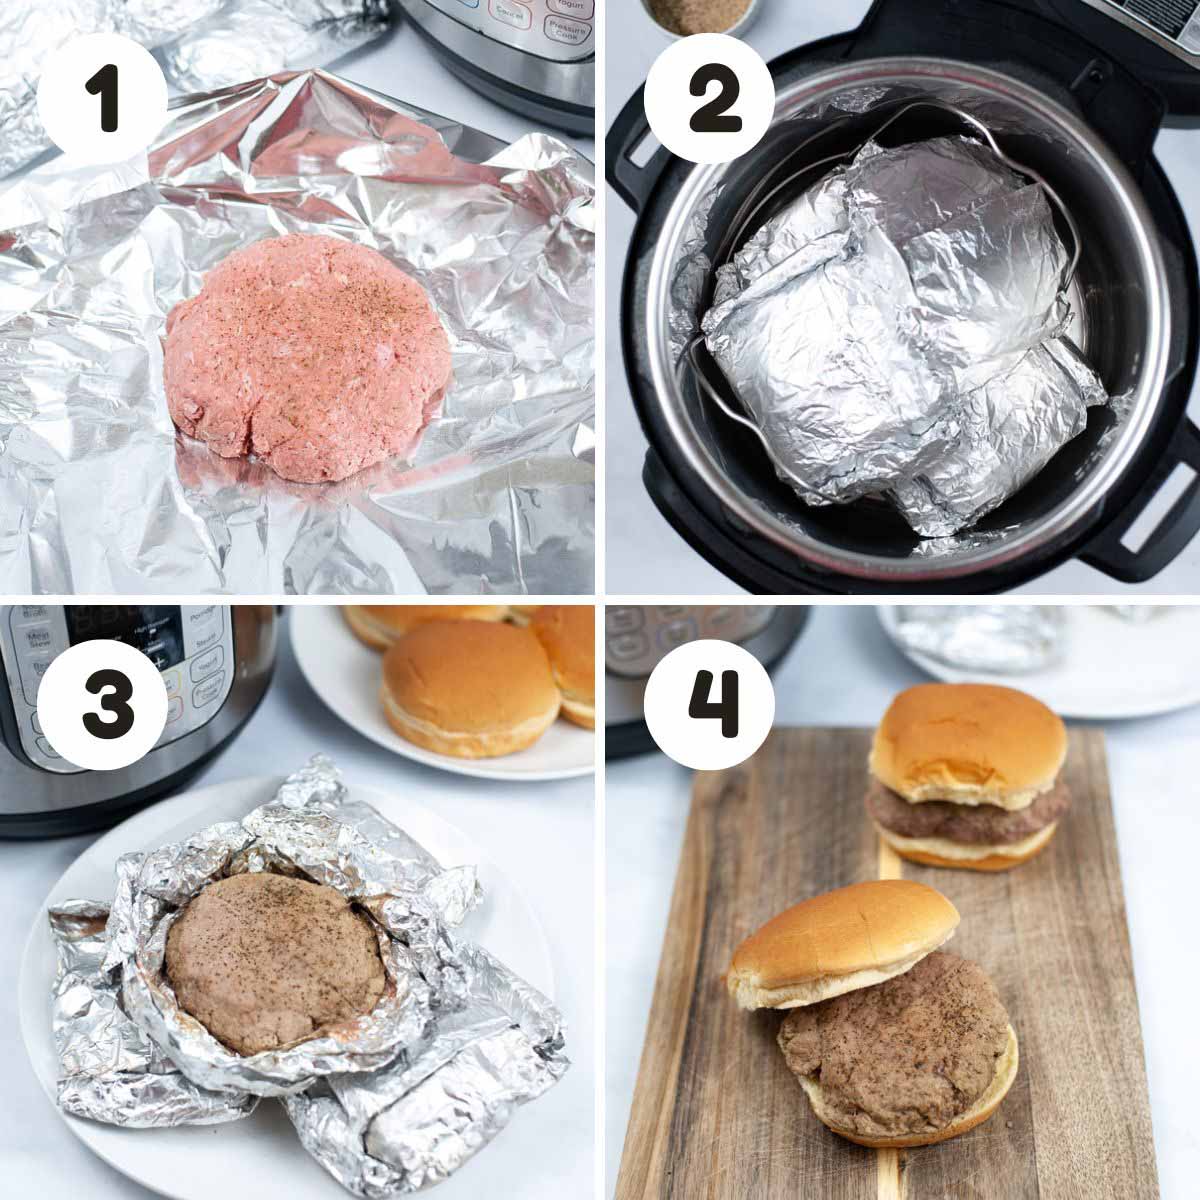 Steps to make the burgers.